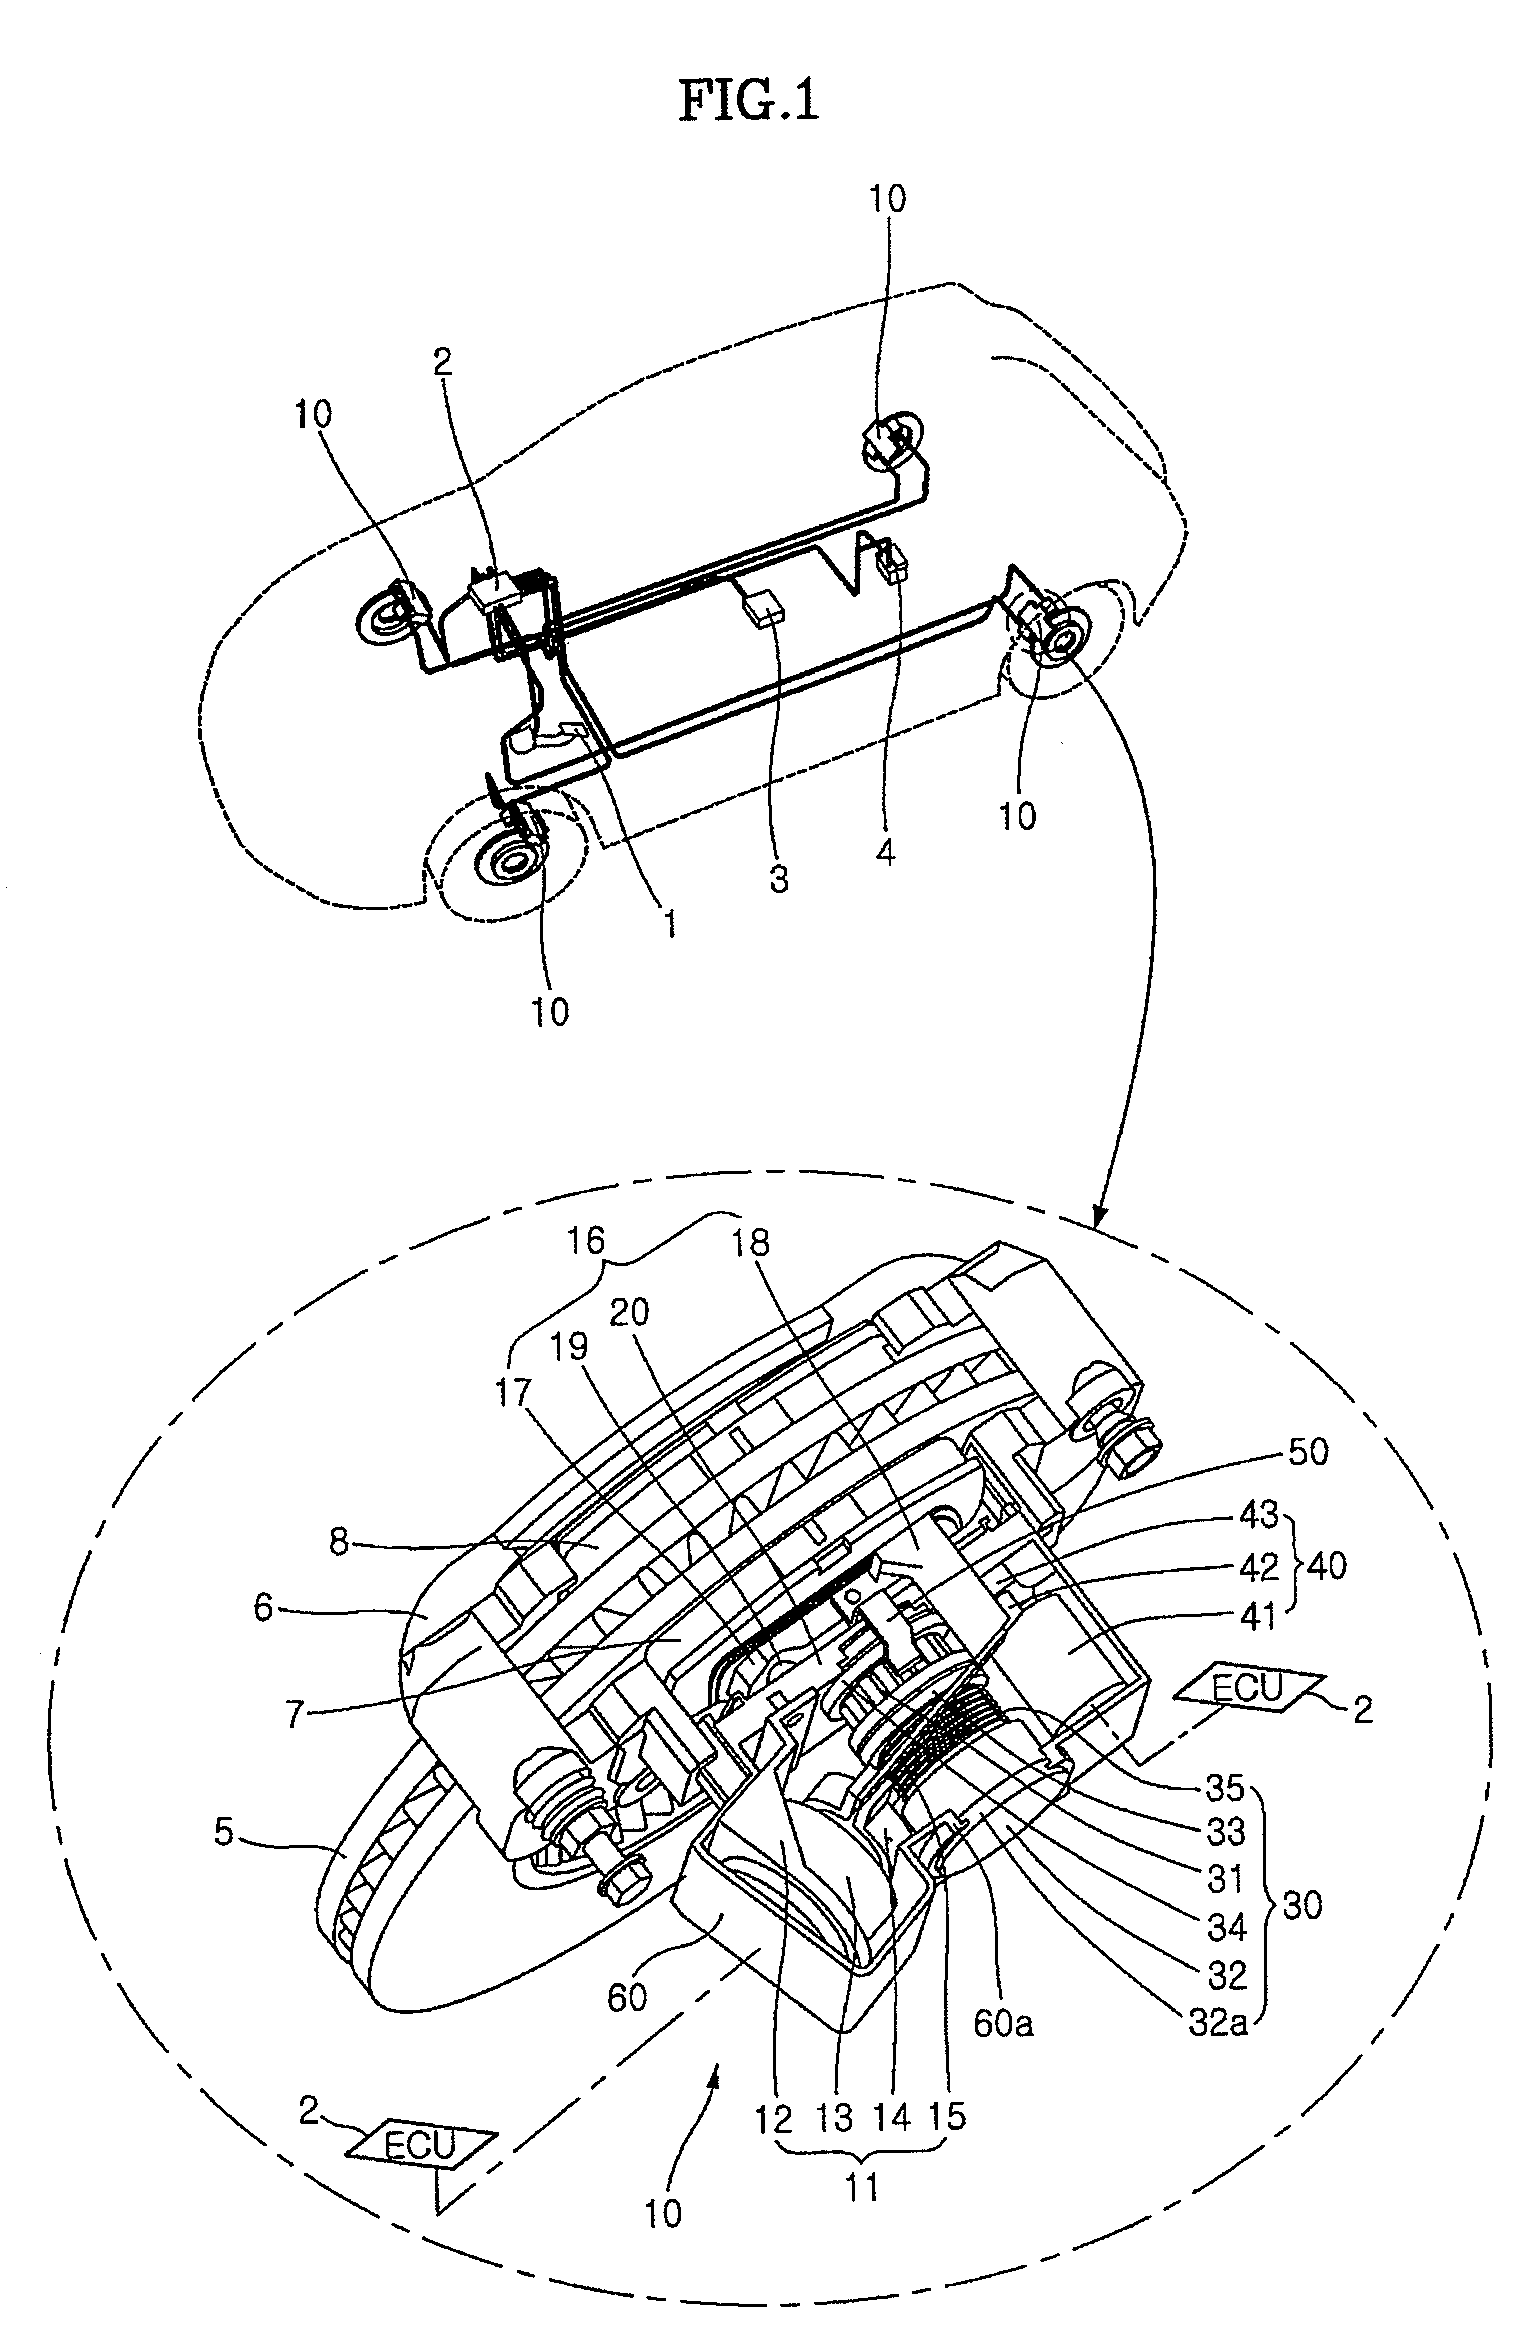 Single motor electro wedge brake system using solenoid mechanism for implementing additional functions